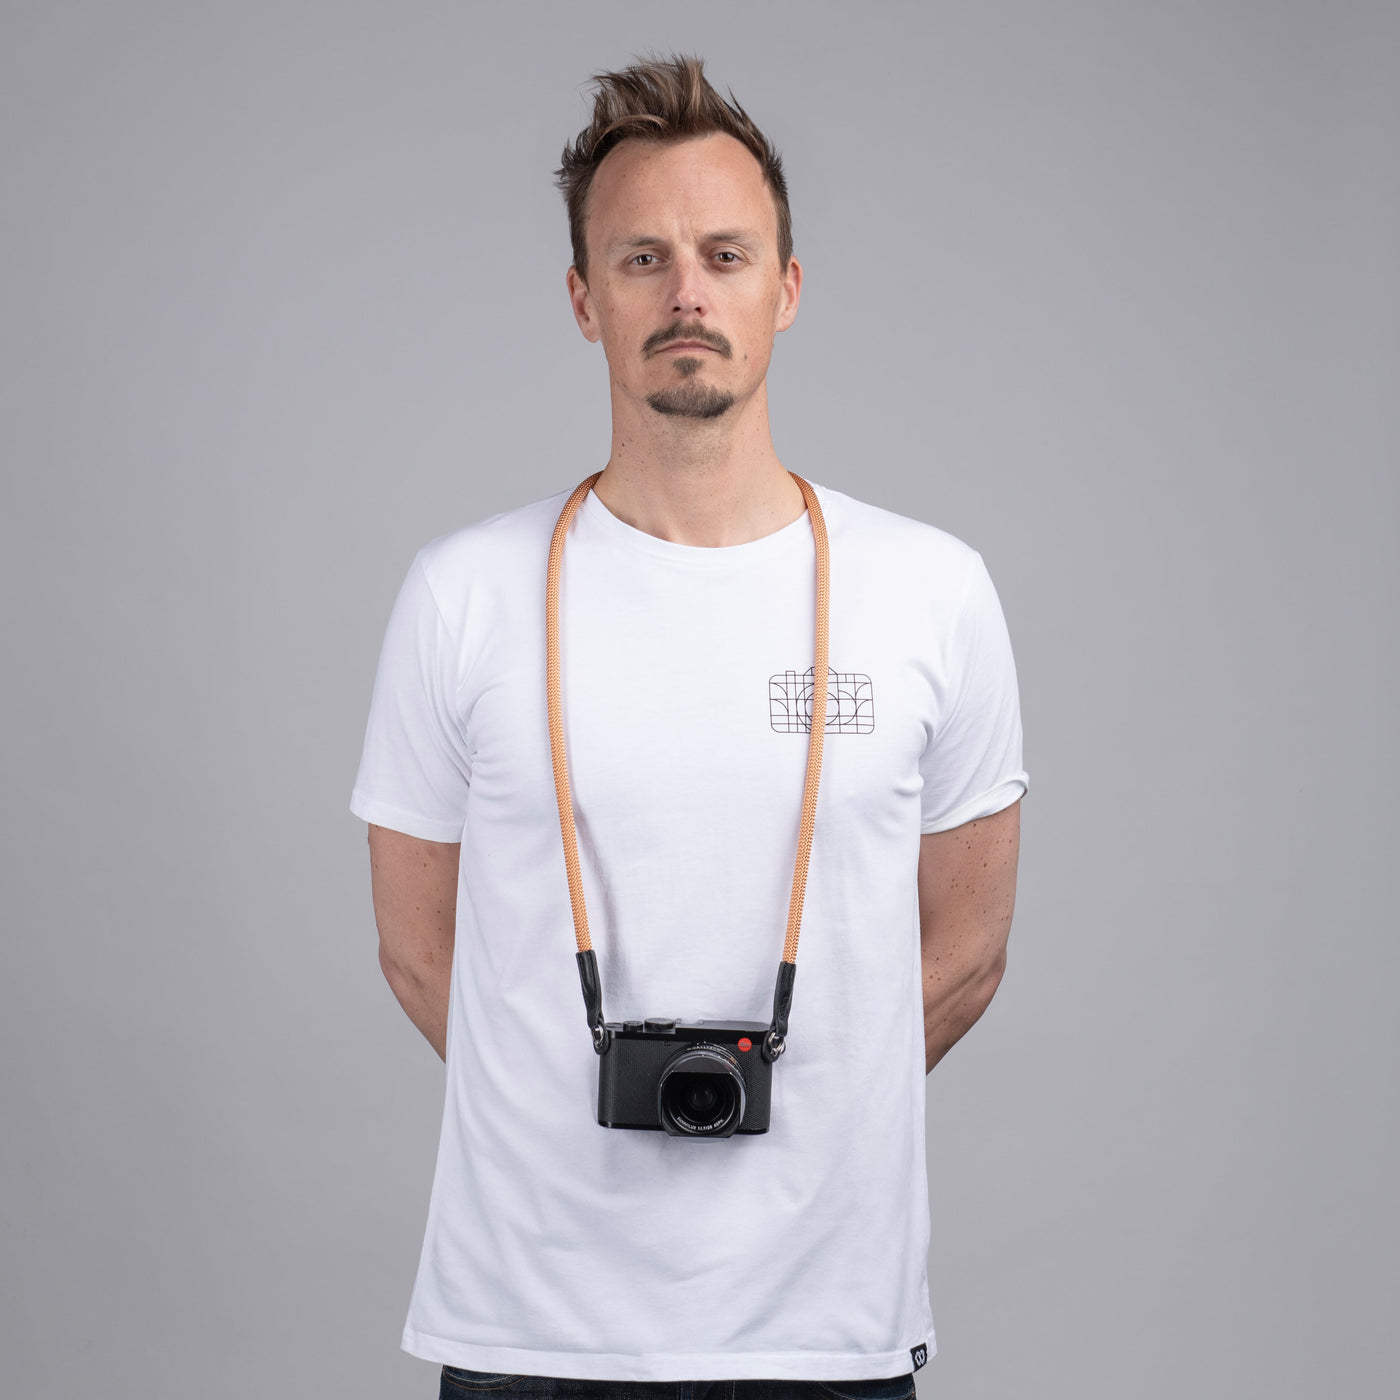 Photographer in a white t-shirt wearing a Leica camera around his neck with a Peach rope strap 